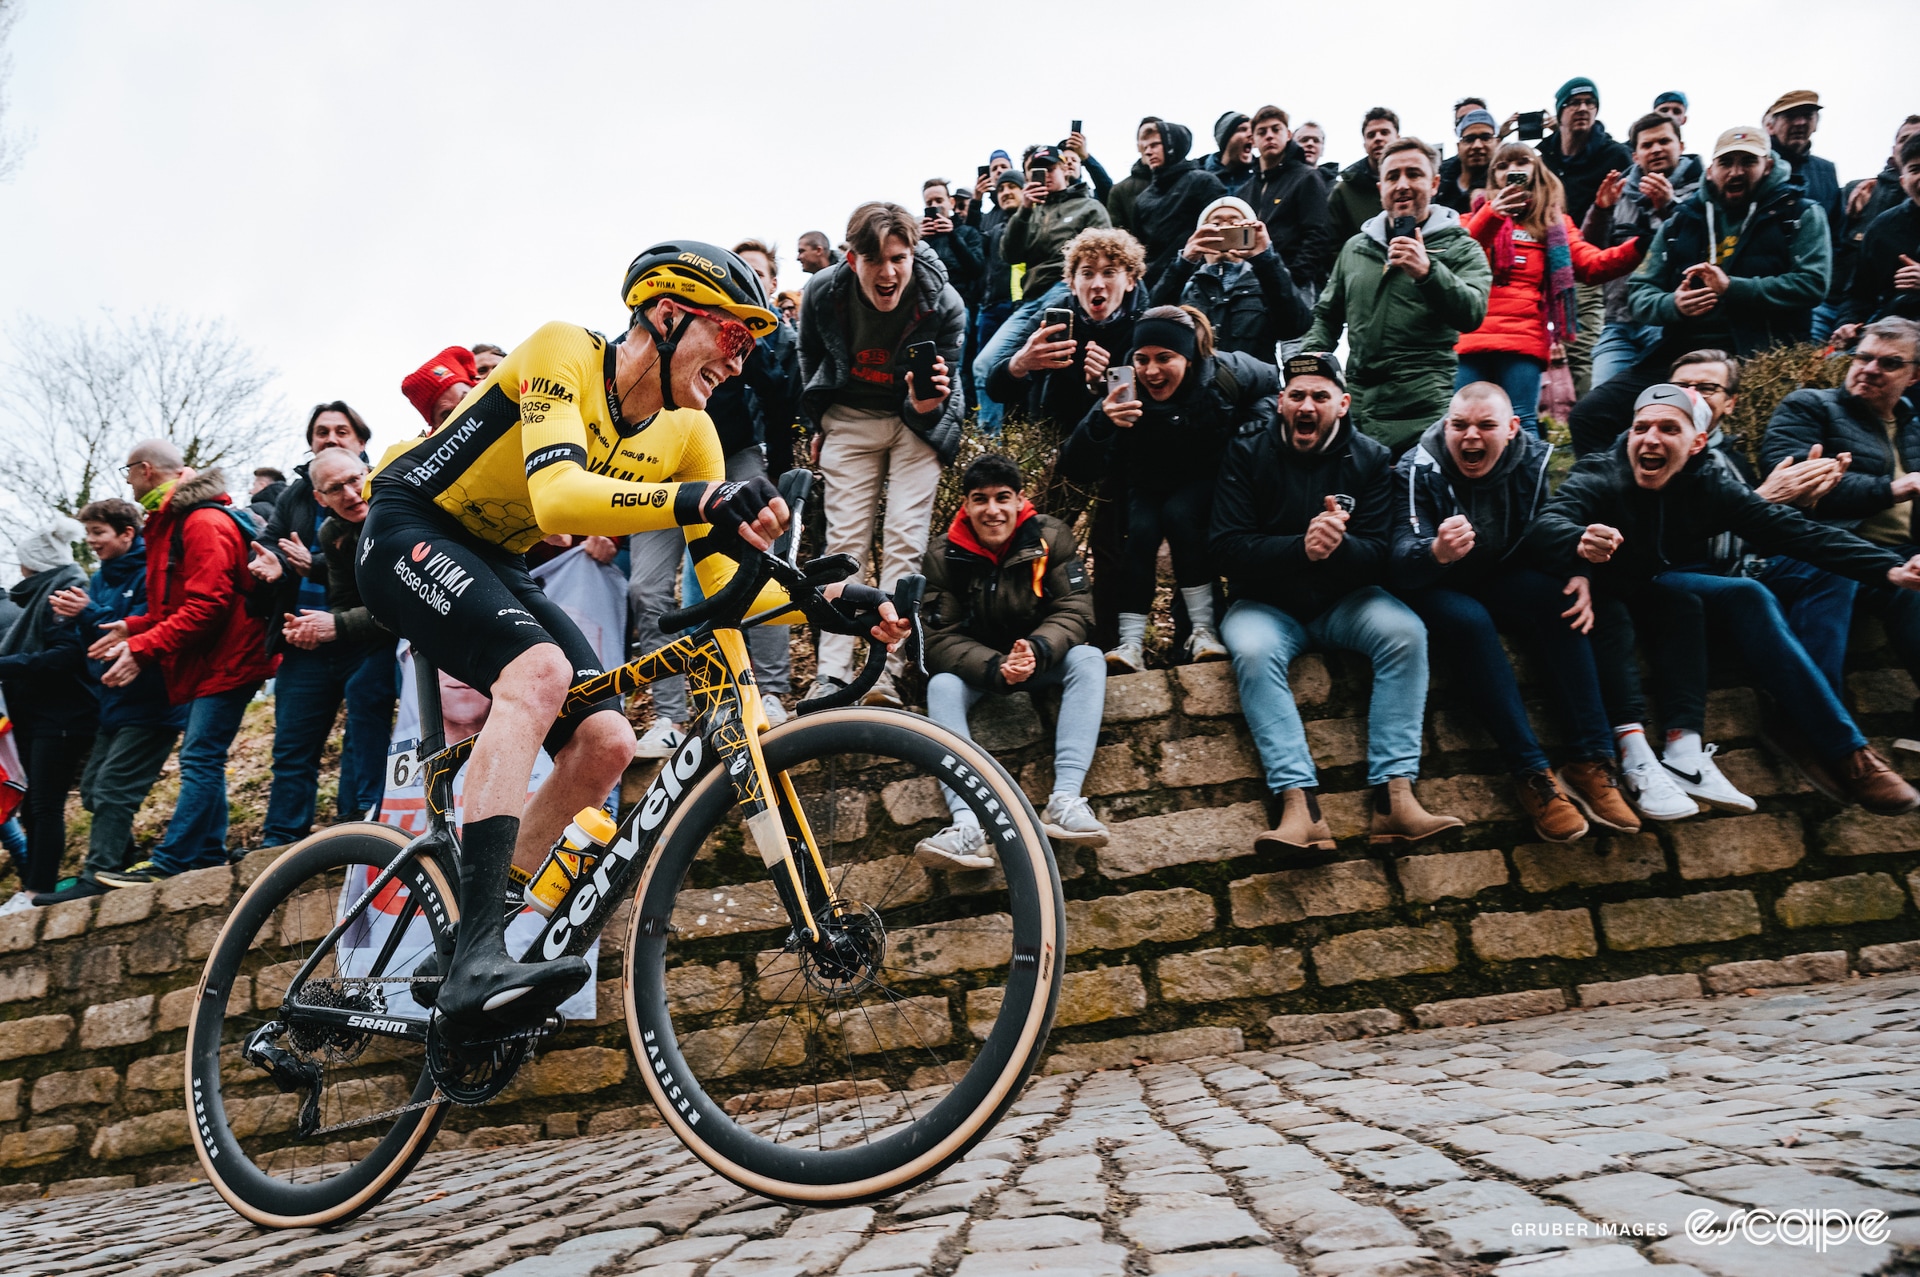 Jorgensen rides up the Muur in front of screaming fans